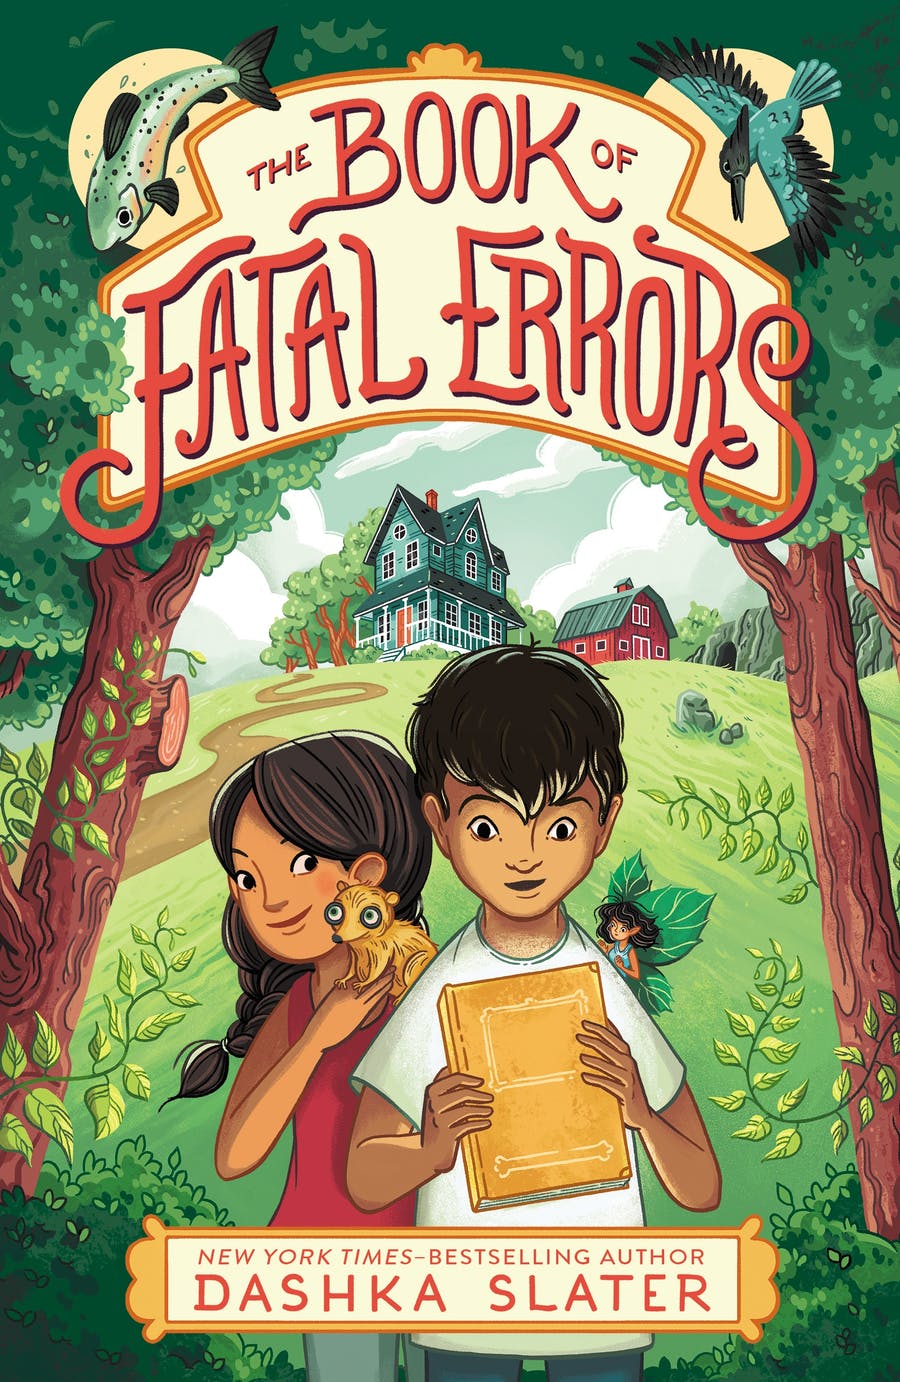 book-of-fatal-errors-cover-126